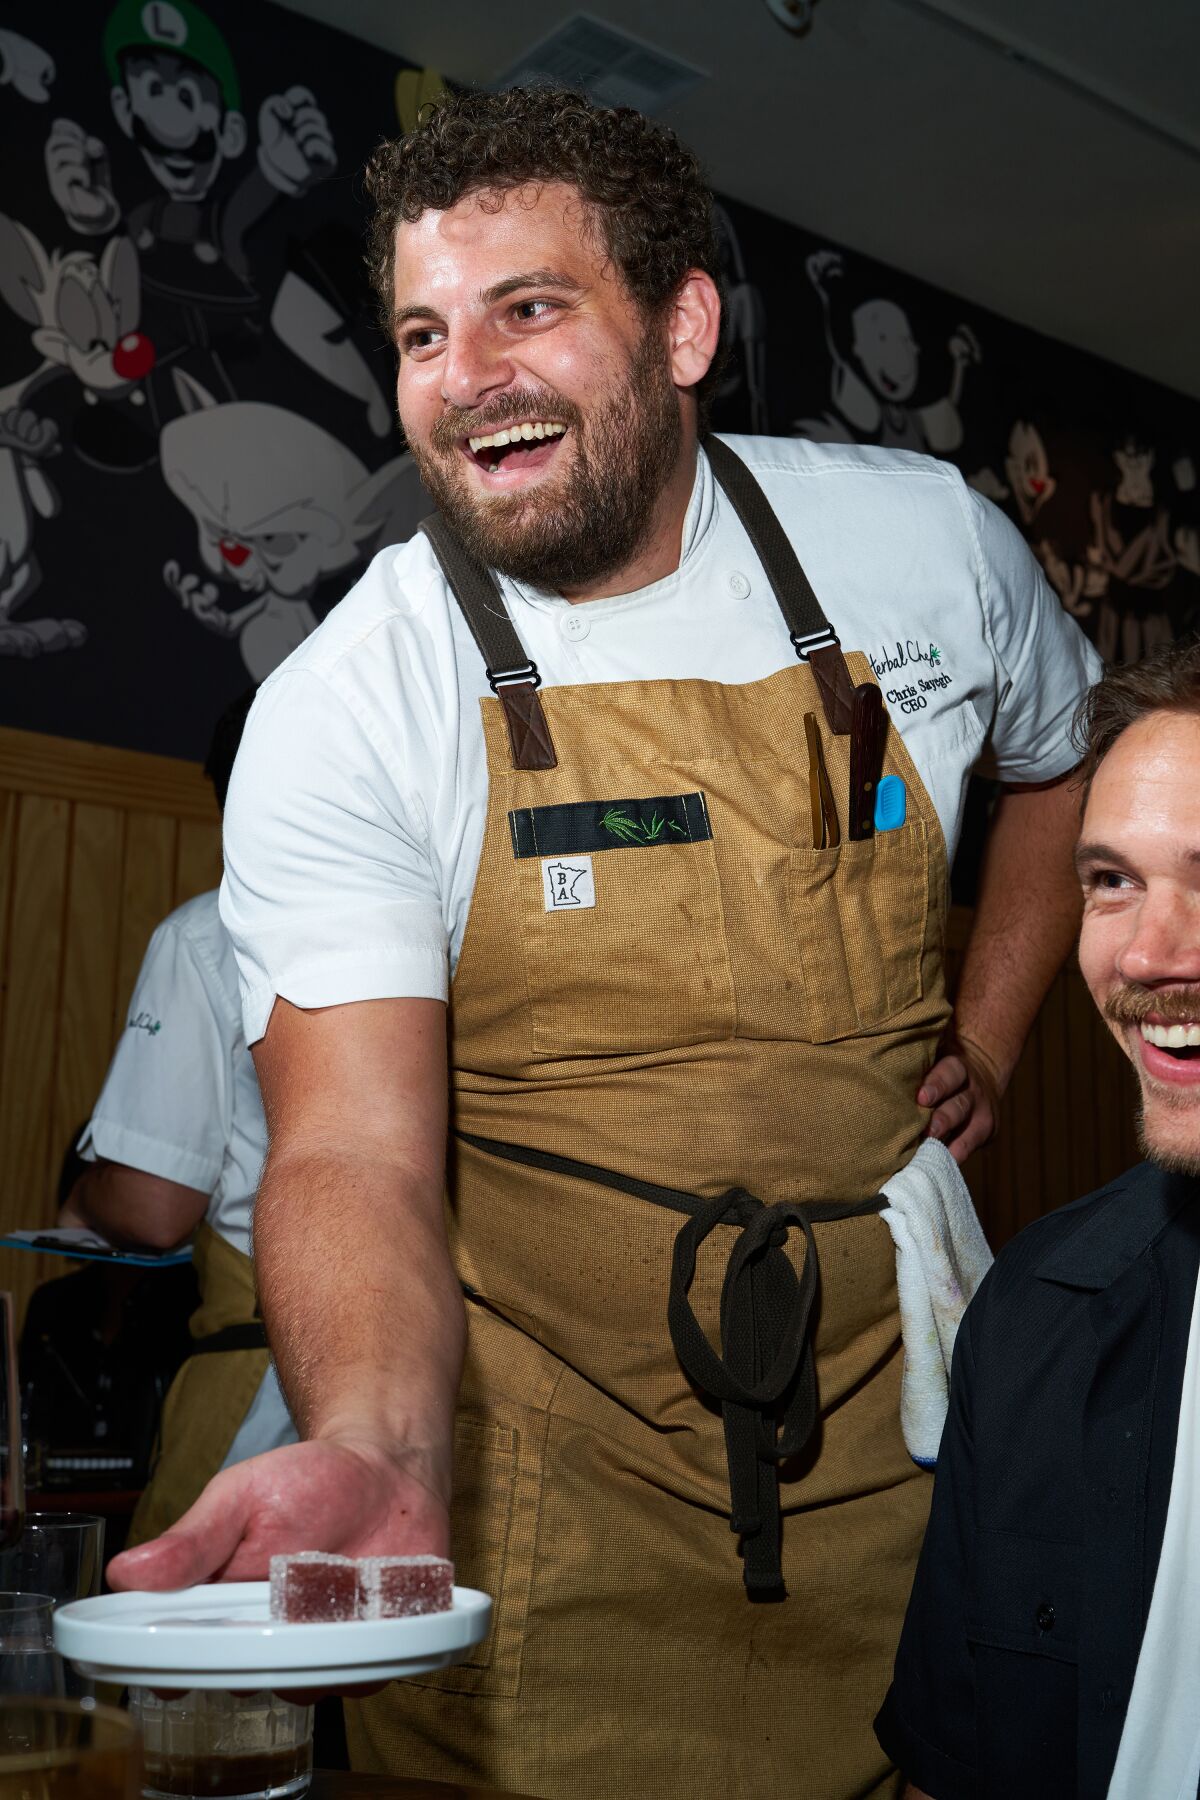 A smiling, bearded chef wearing an apron delivers a plate to a table.